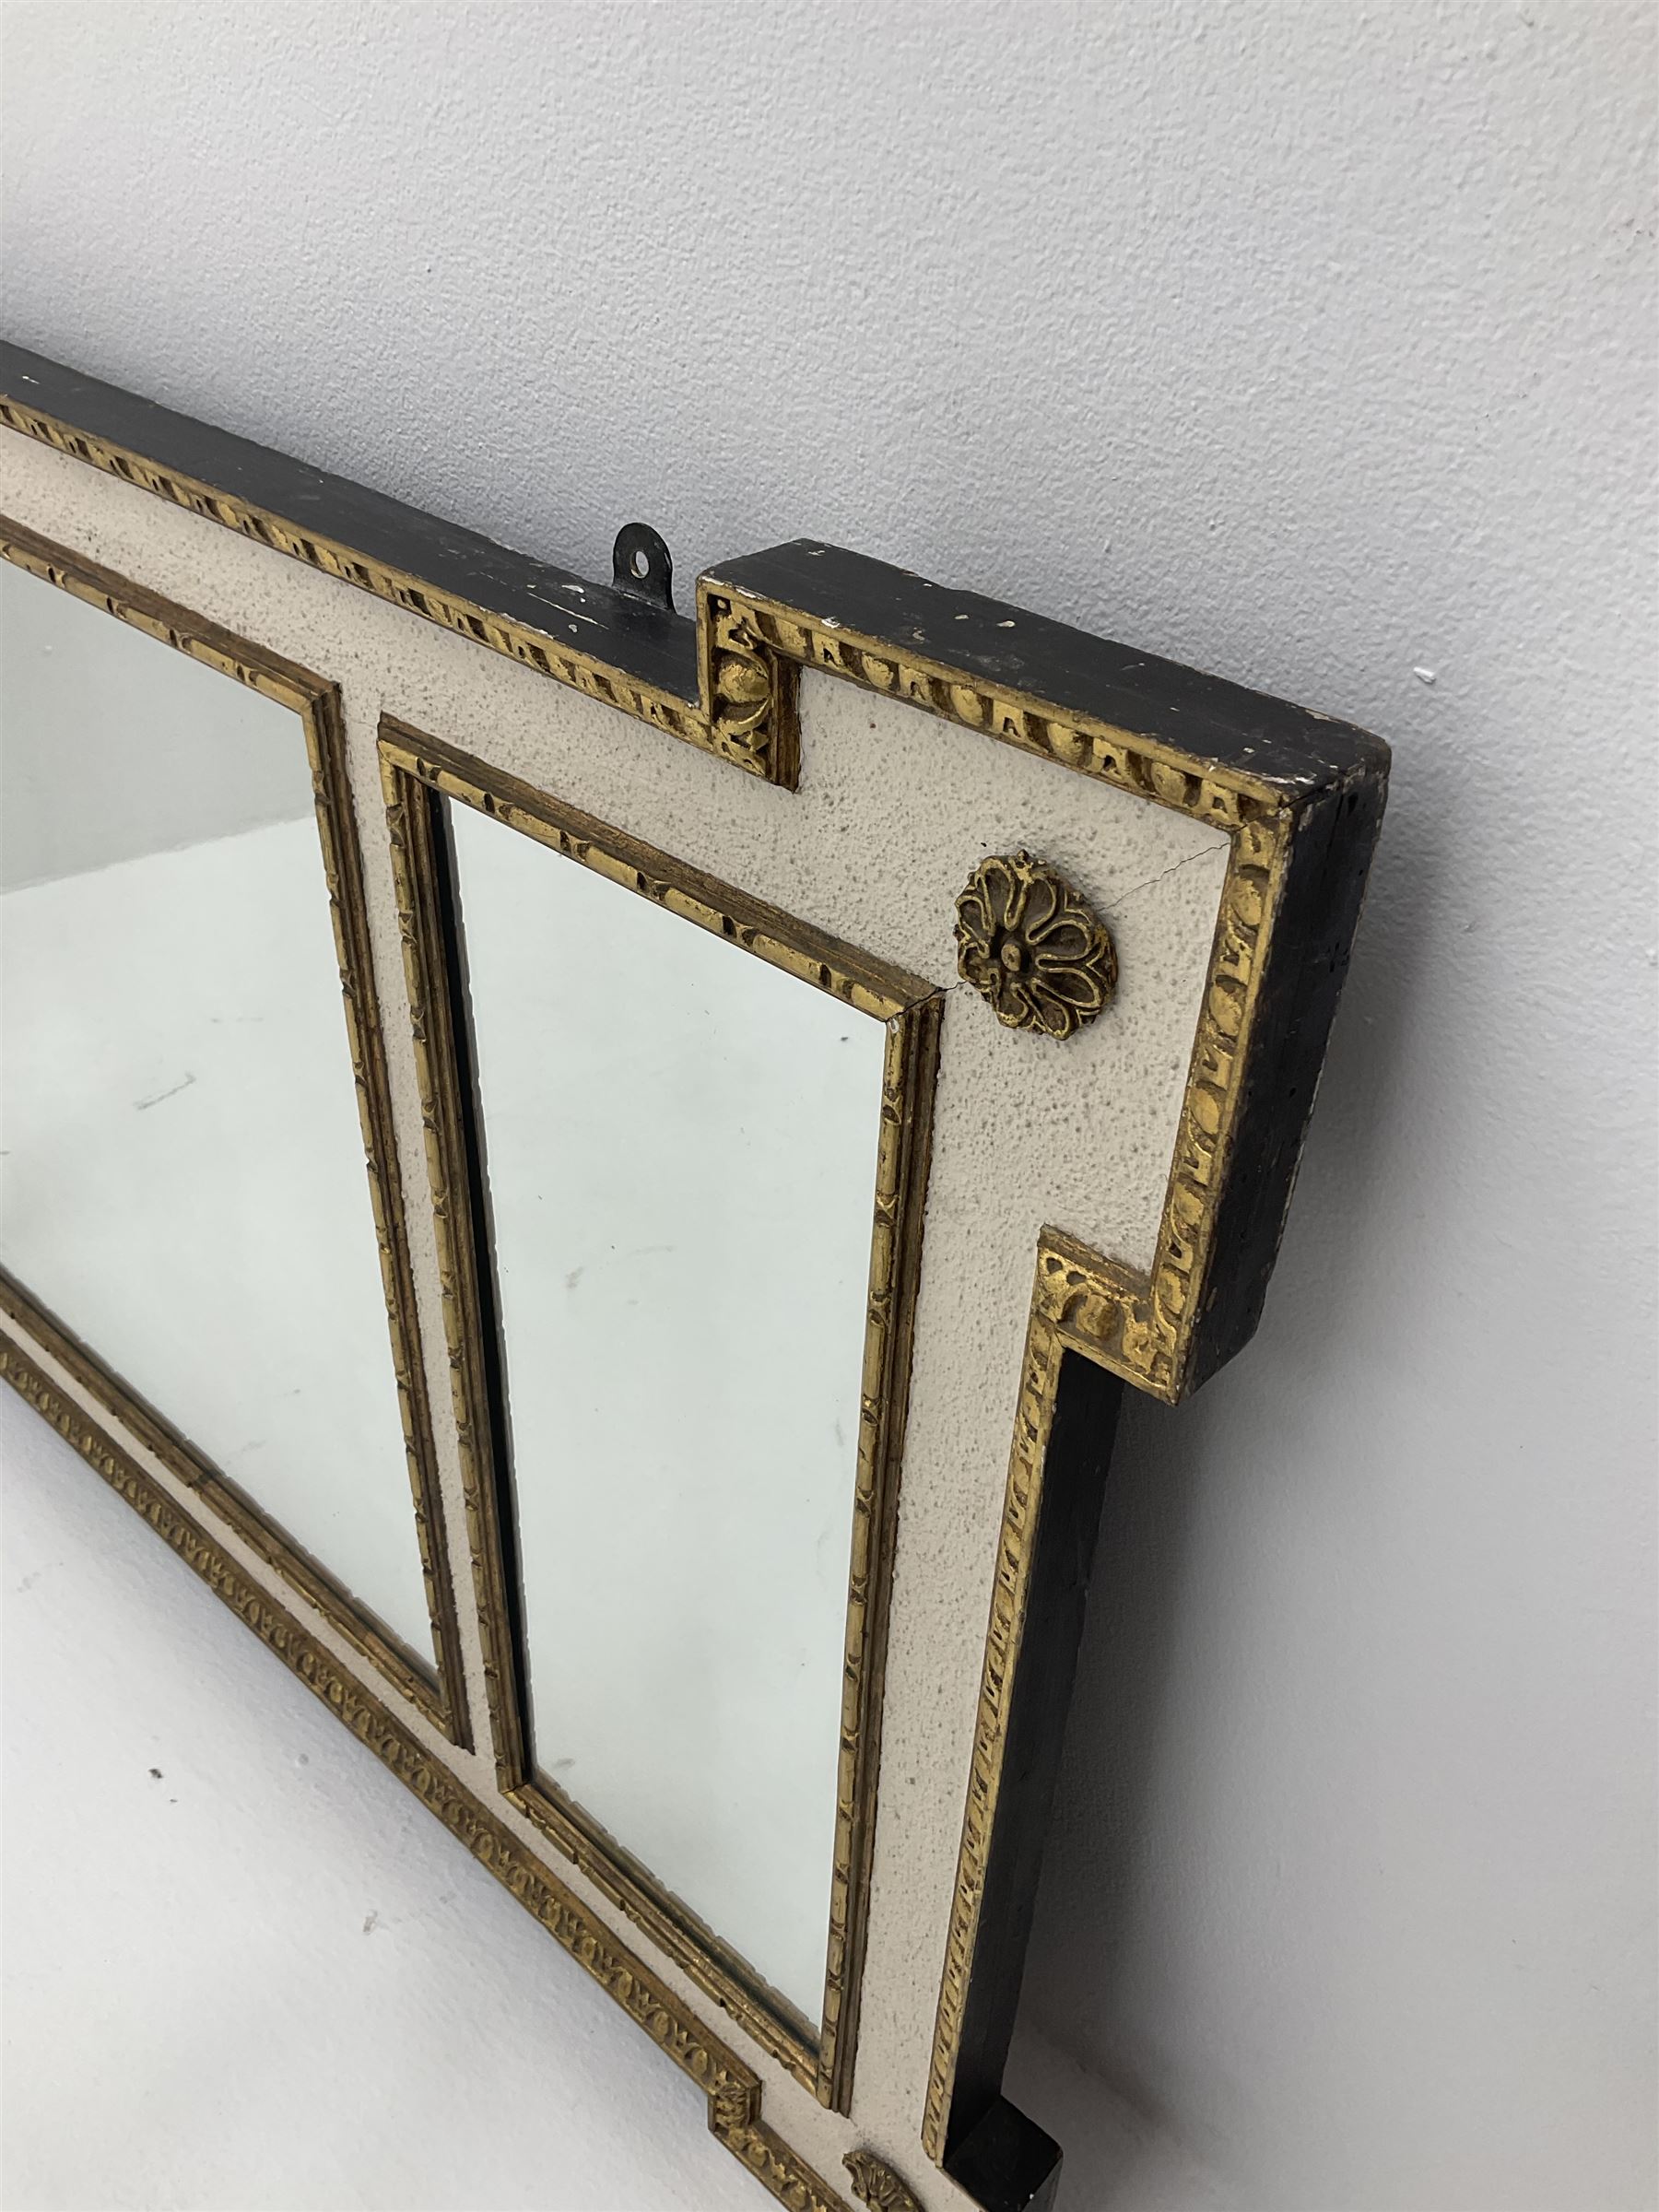 Regency style painted and gilt pier glass mirror - Image 2 of 2